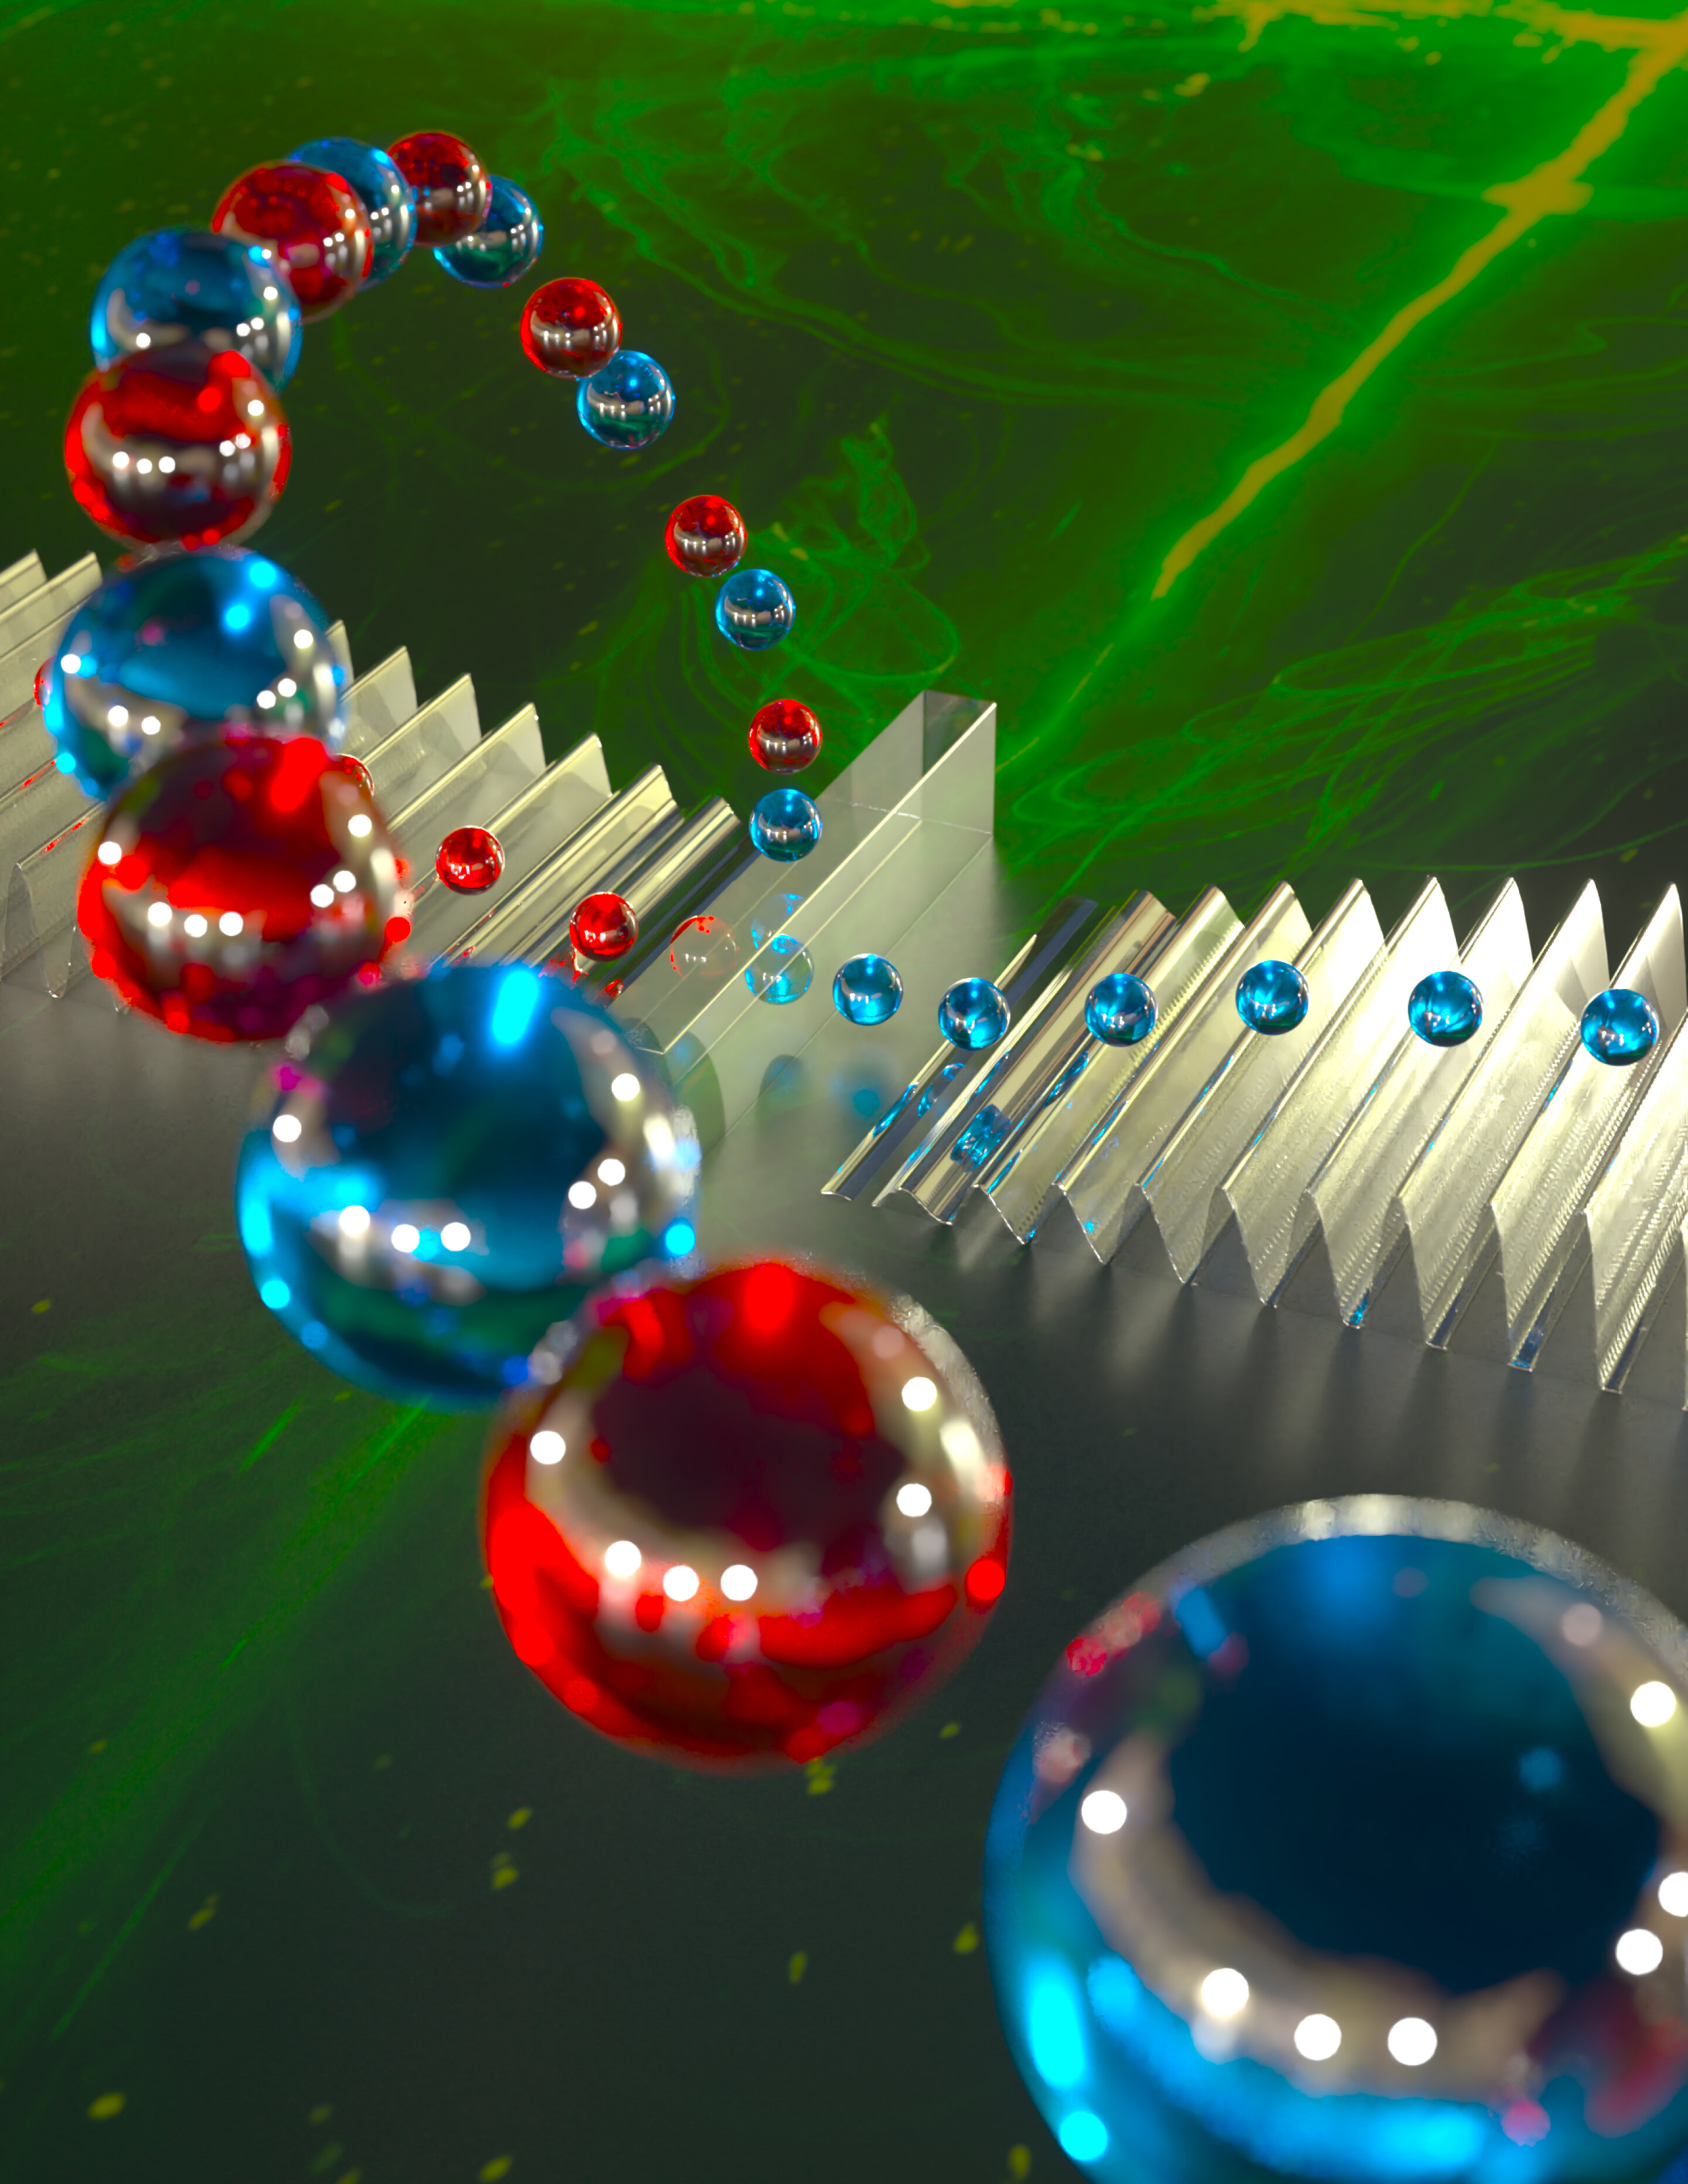 Splitting phonons has taken a step toward a new type of quantum computer